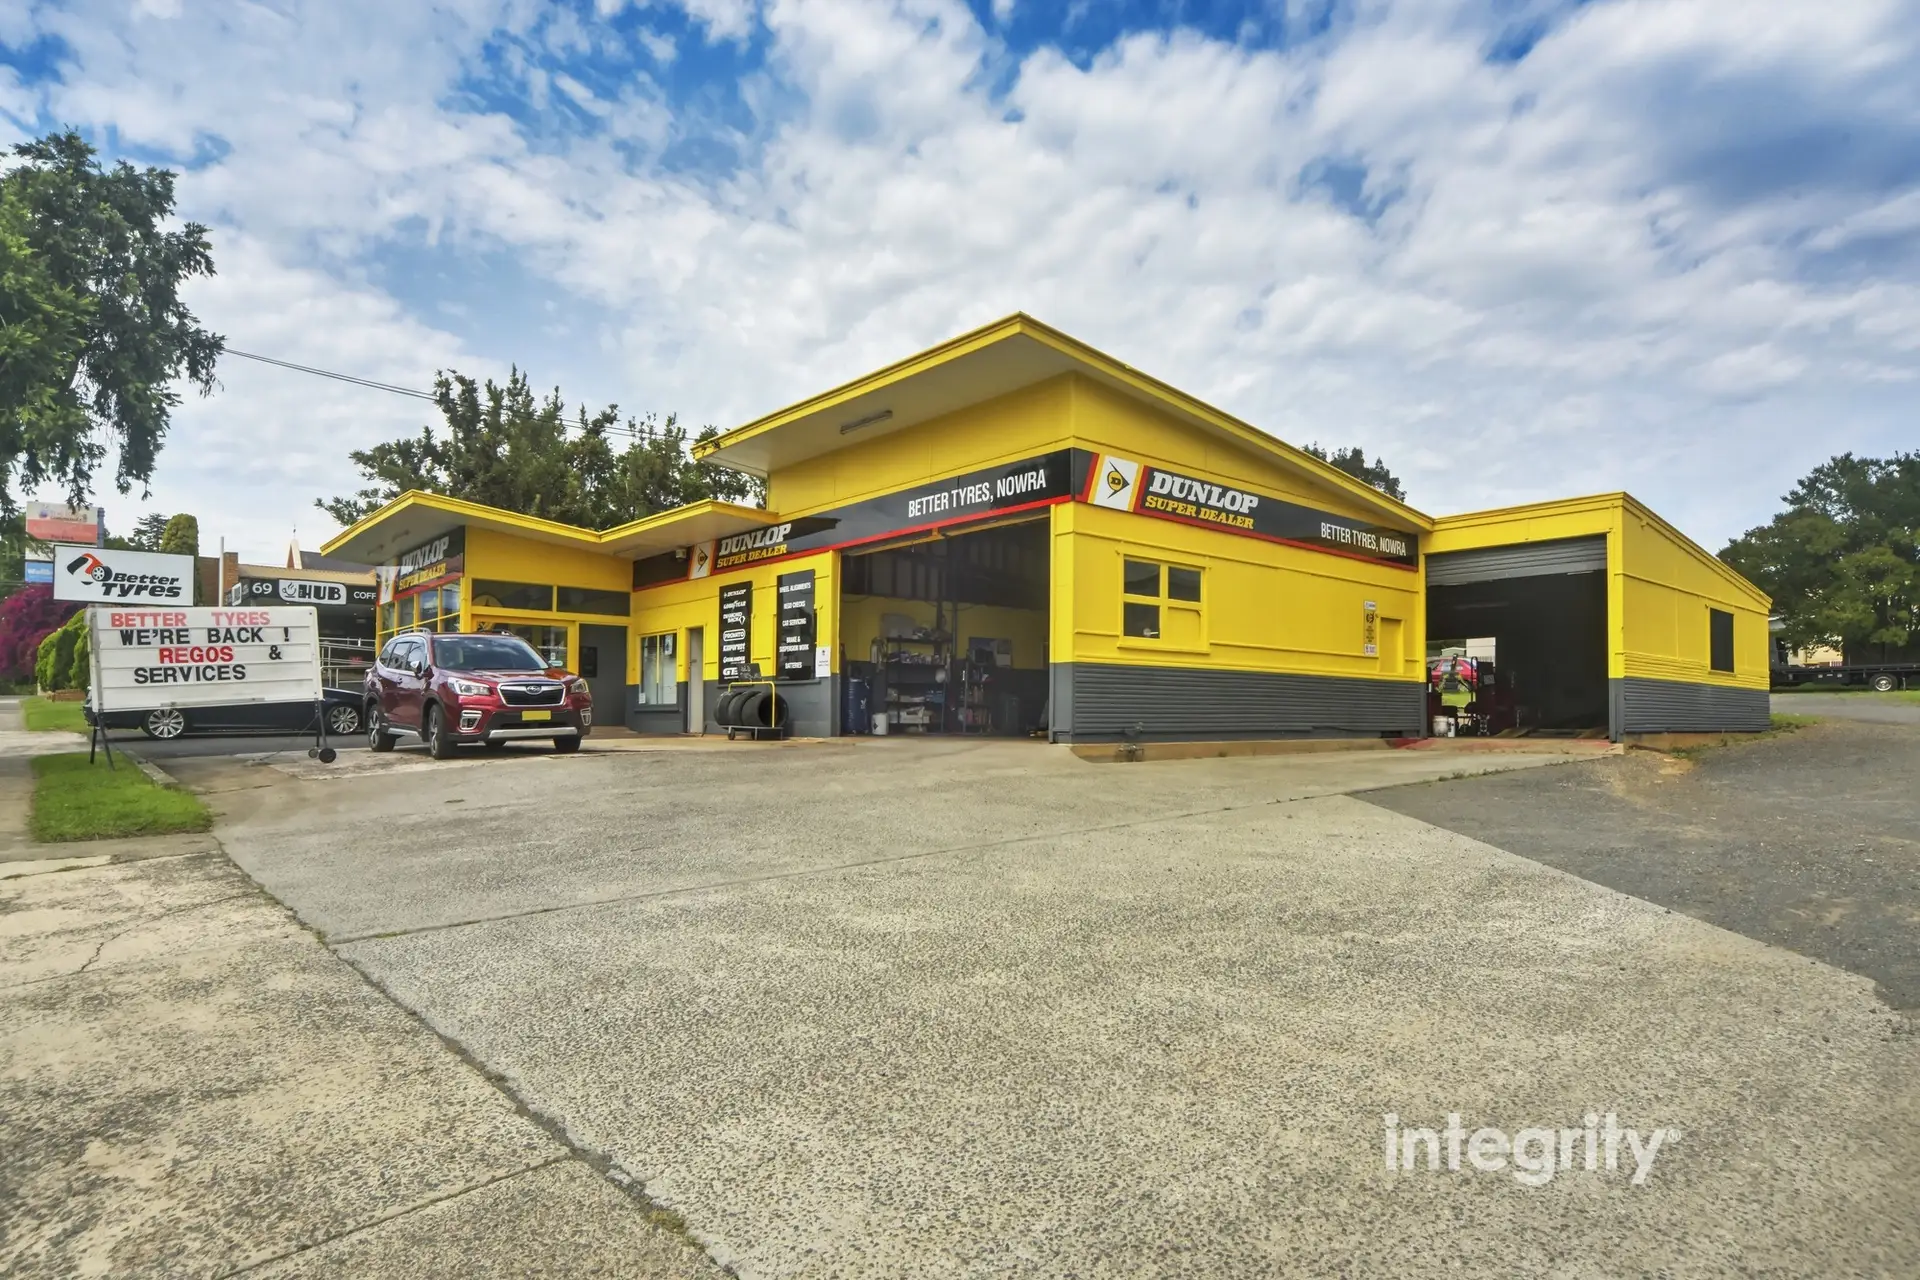 61,63&65 Berry Street, Nowra For Sale by Integrity Real Estate - image 6